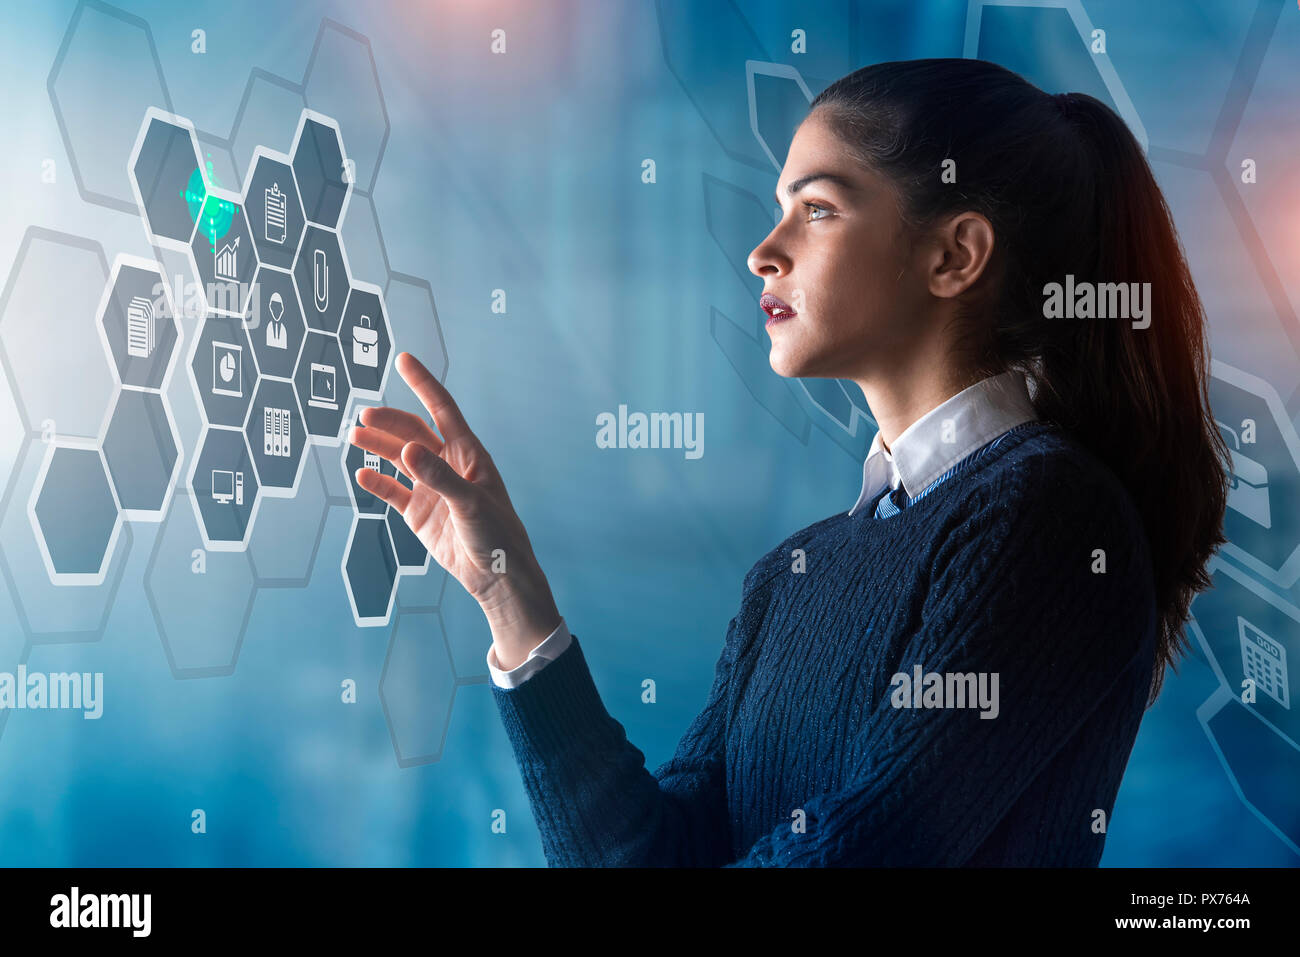 modern business woman using innovative technologies to manage her administrative work, analyzing a digital projected graph Stock Photo